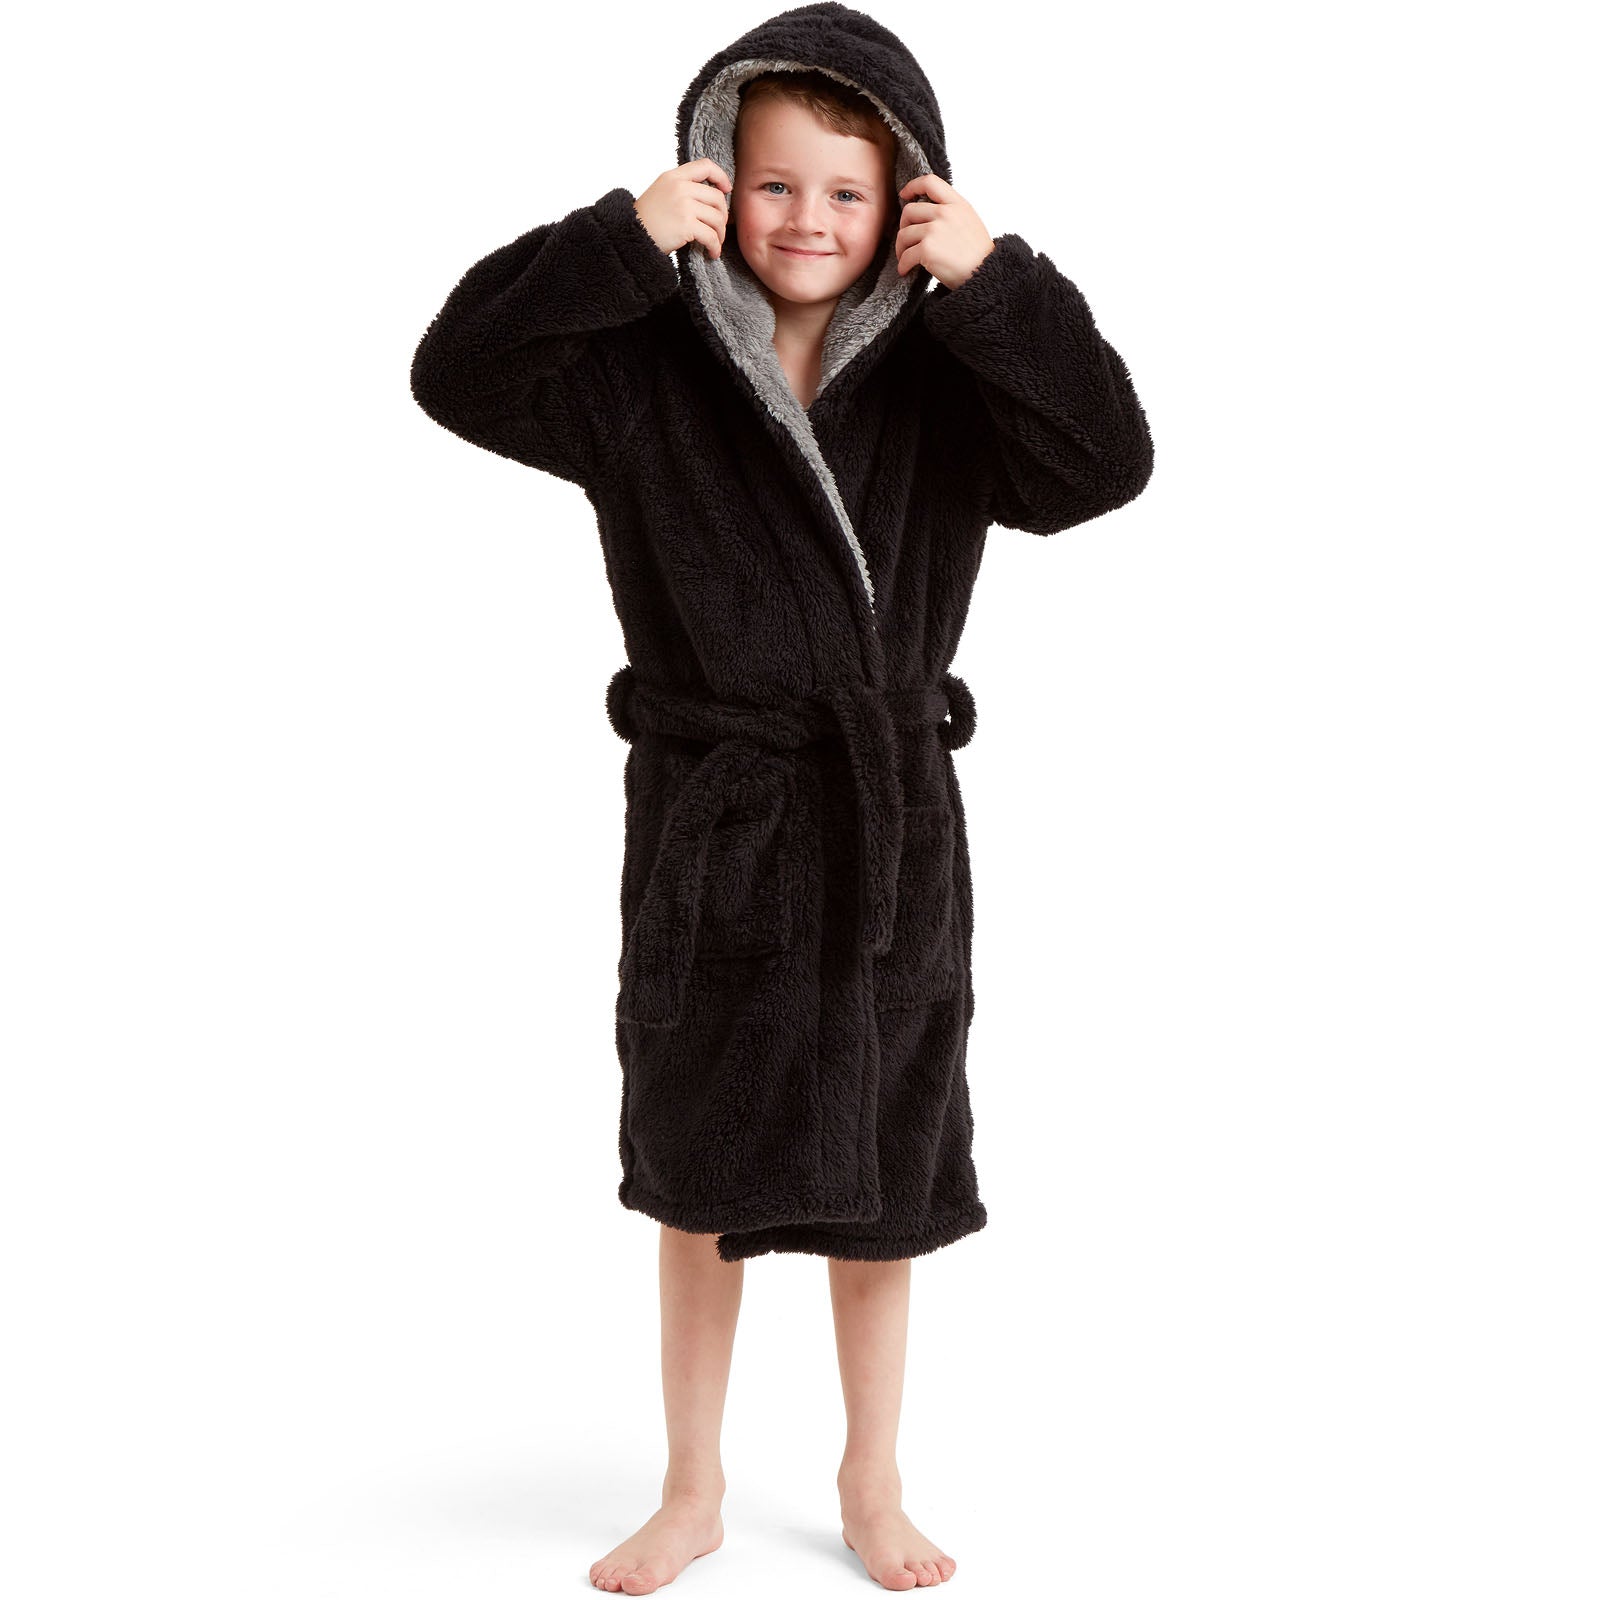 DSQUARED2 | Black Men's Dressing Gown | YOOX